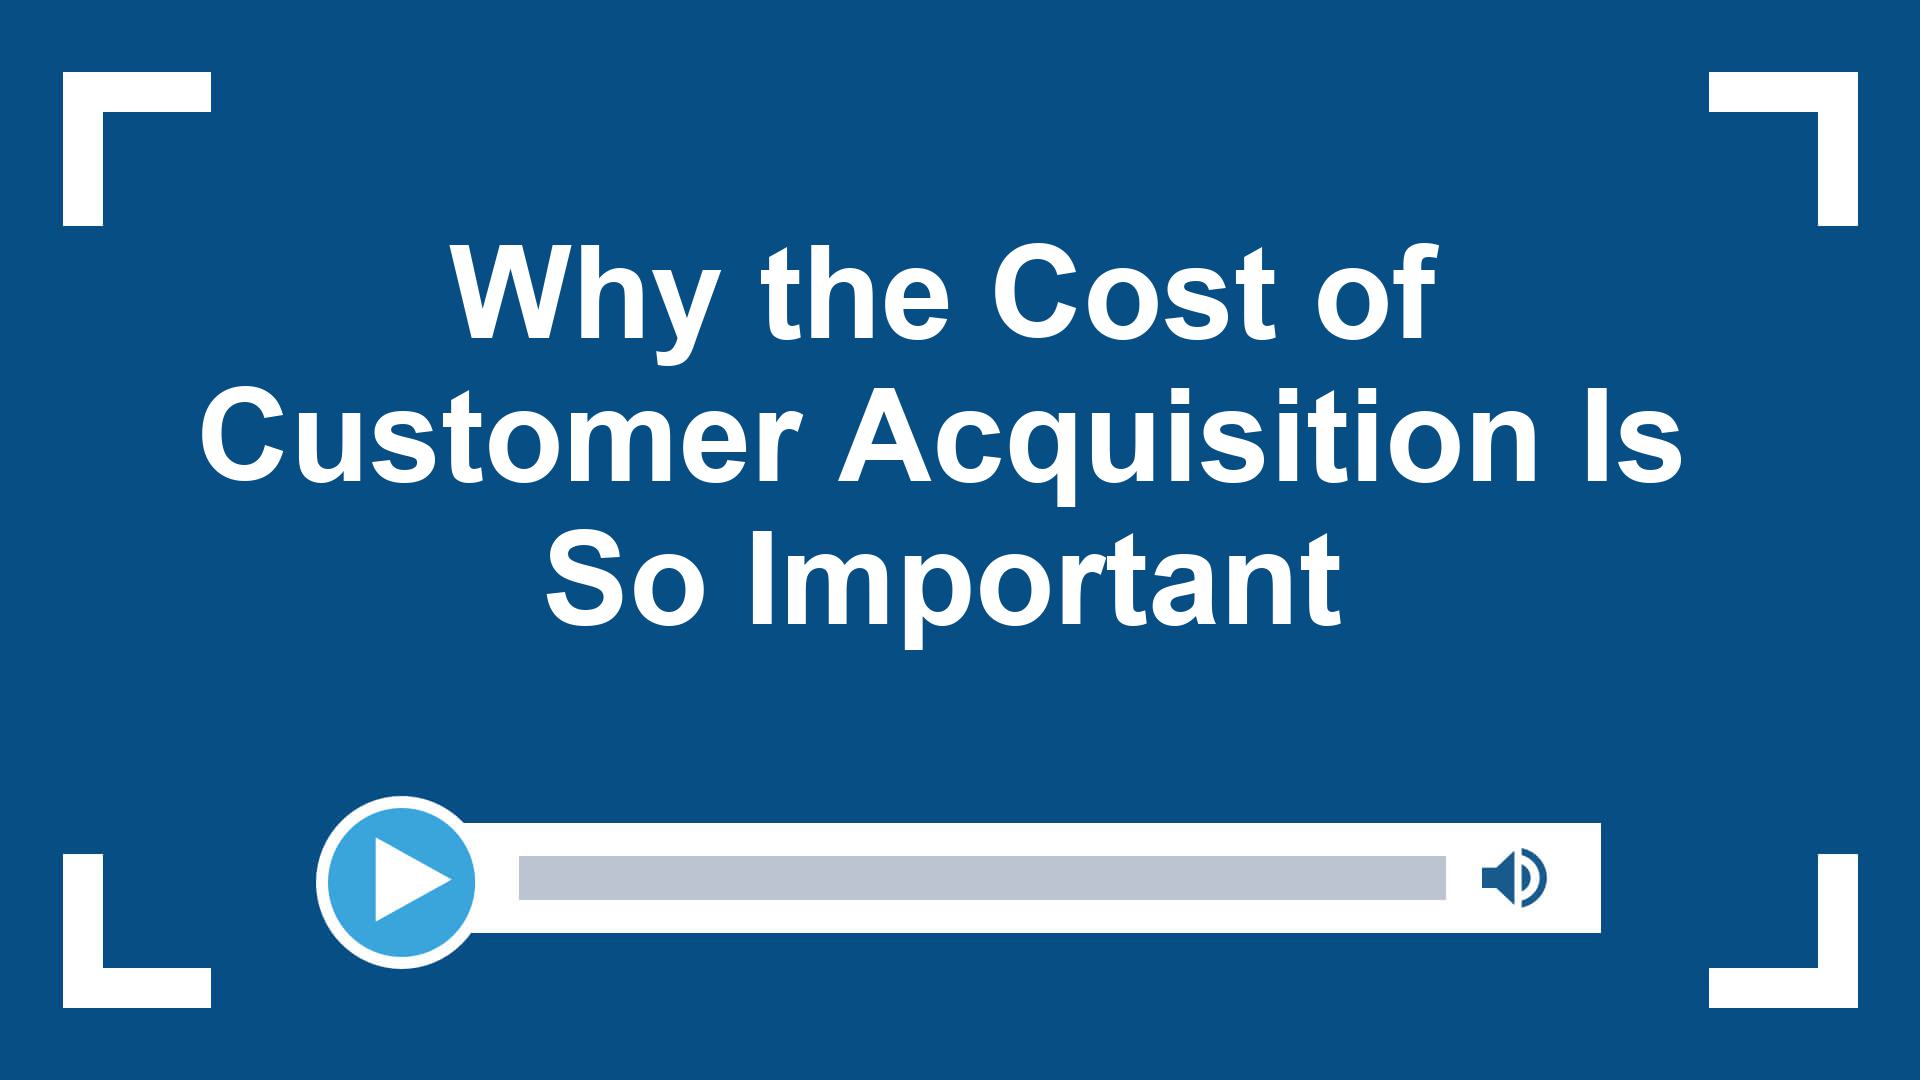 Why the Cost of Customer Acquisition Is So Important